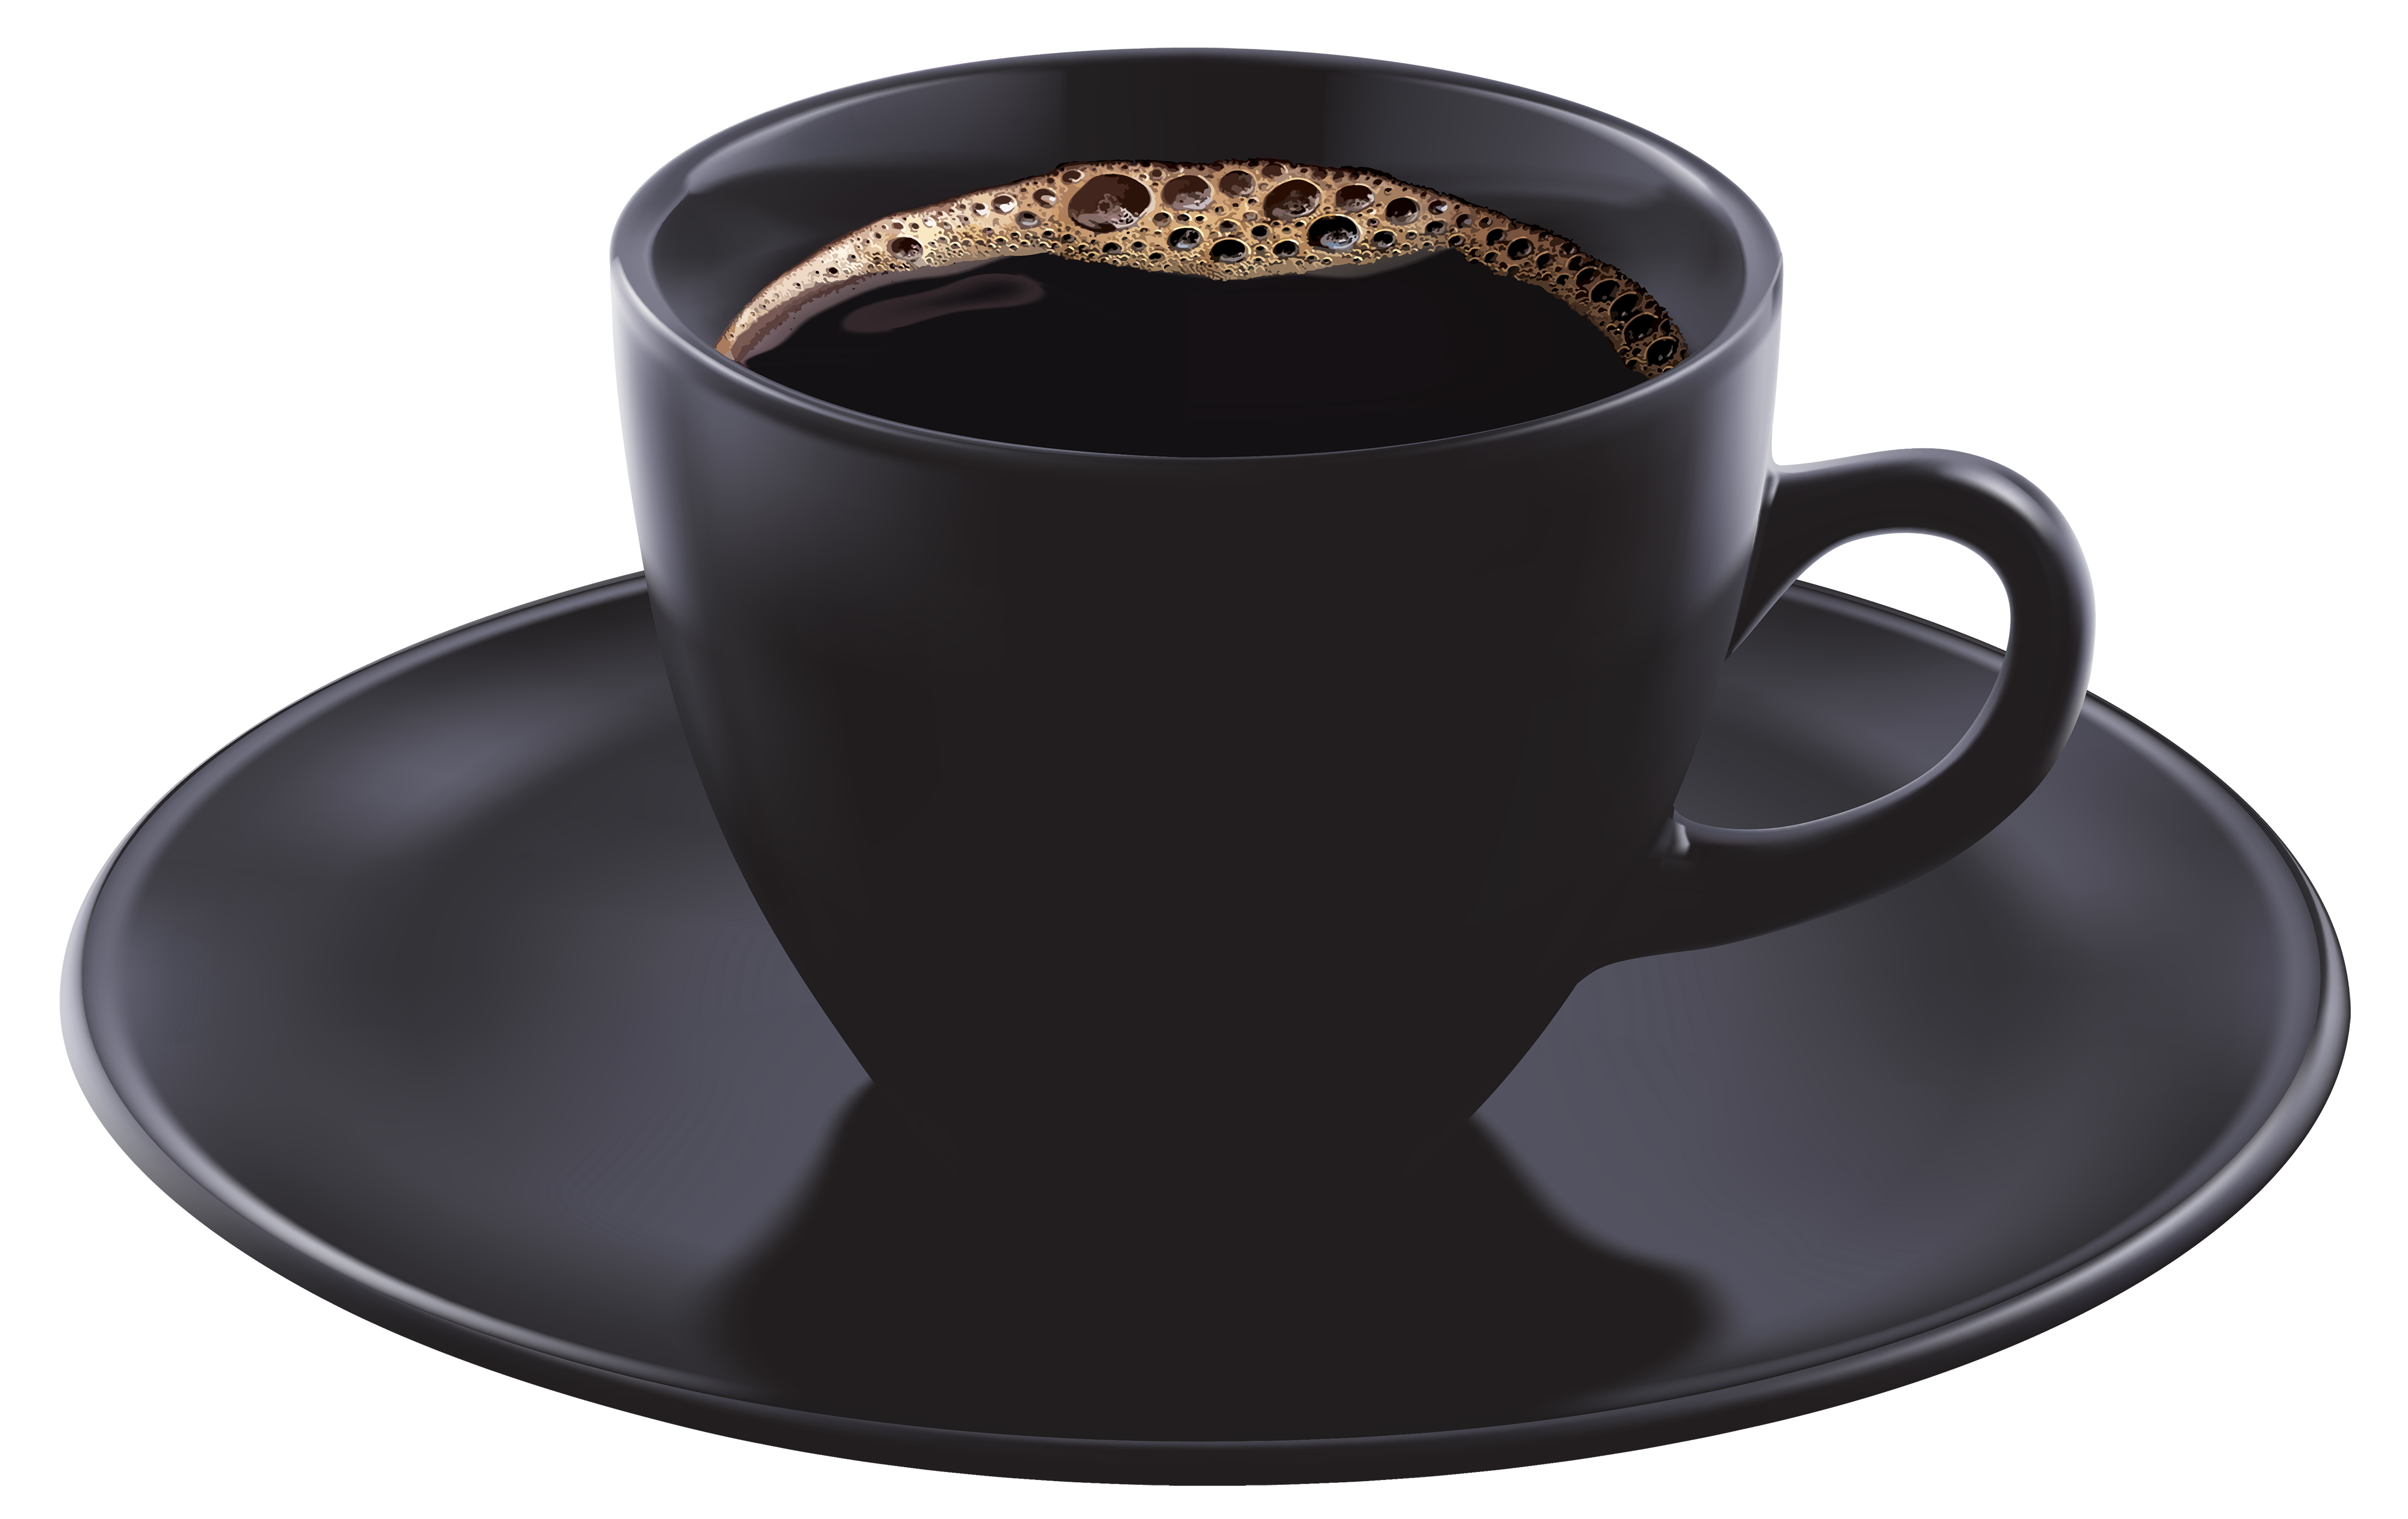 Free Coffee Cup Png Images Download Free Coffee Cup Png Images Png Images Free Cliparts On Clipart Library